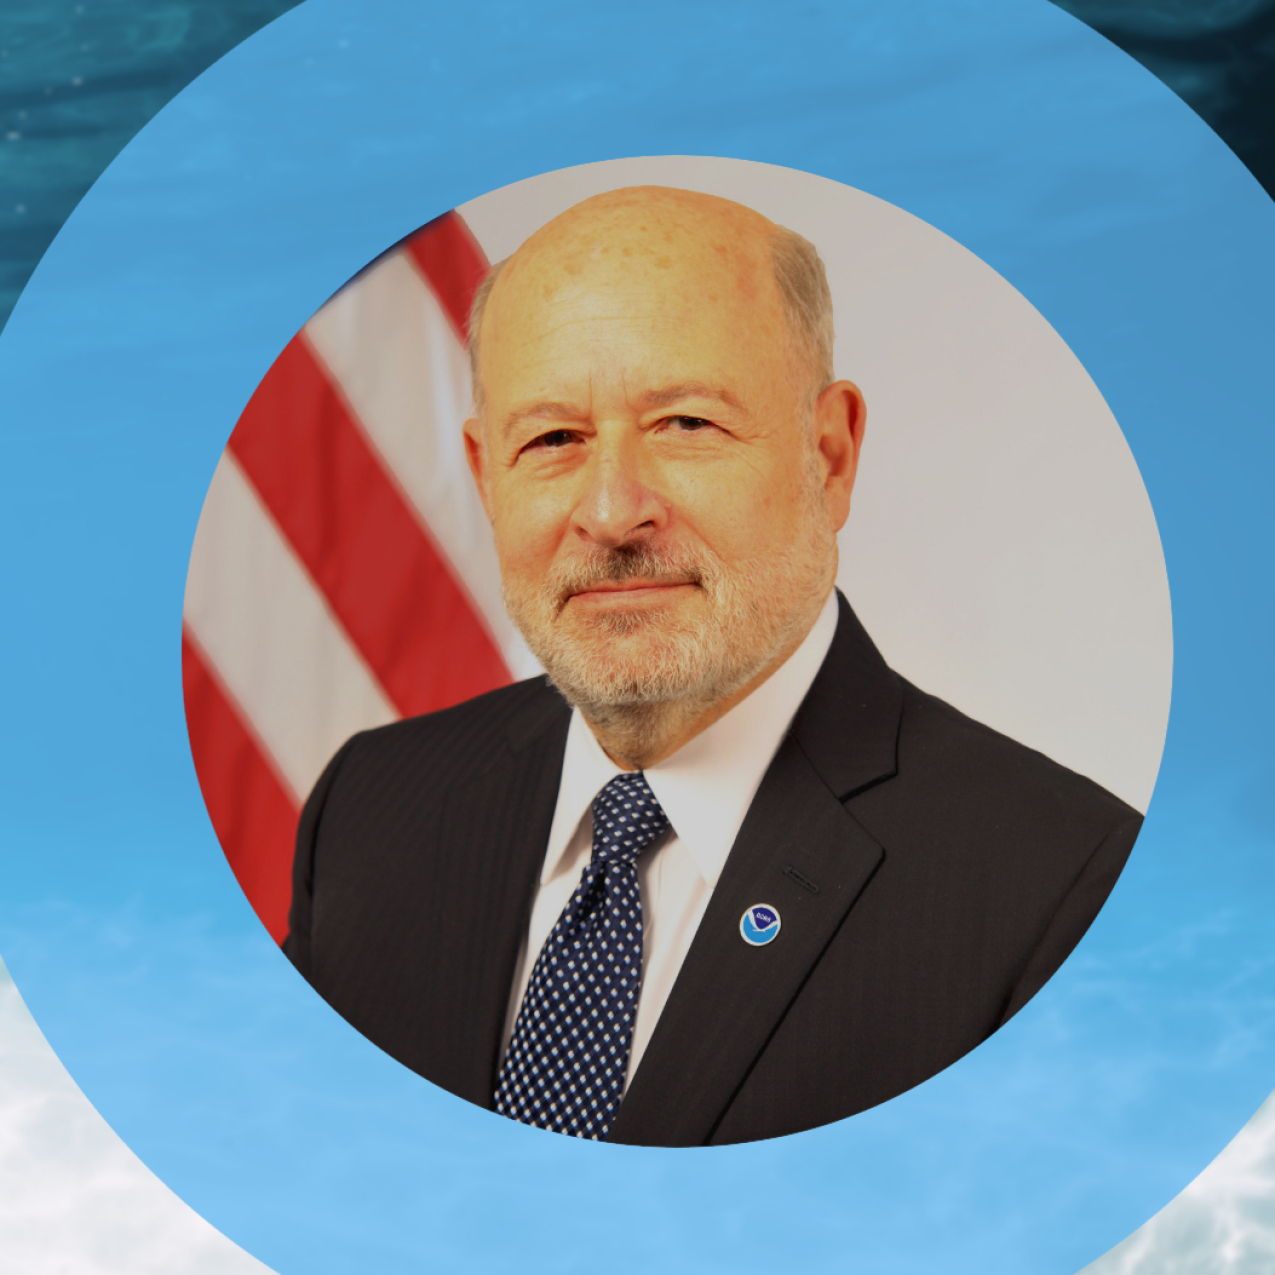 Graphic with an image of Dr. Rick Spinrad and text that says, "Ask the Administrator, @RickSpinradNOAA, #EarthDay2022."